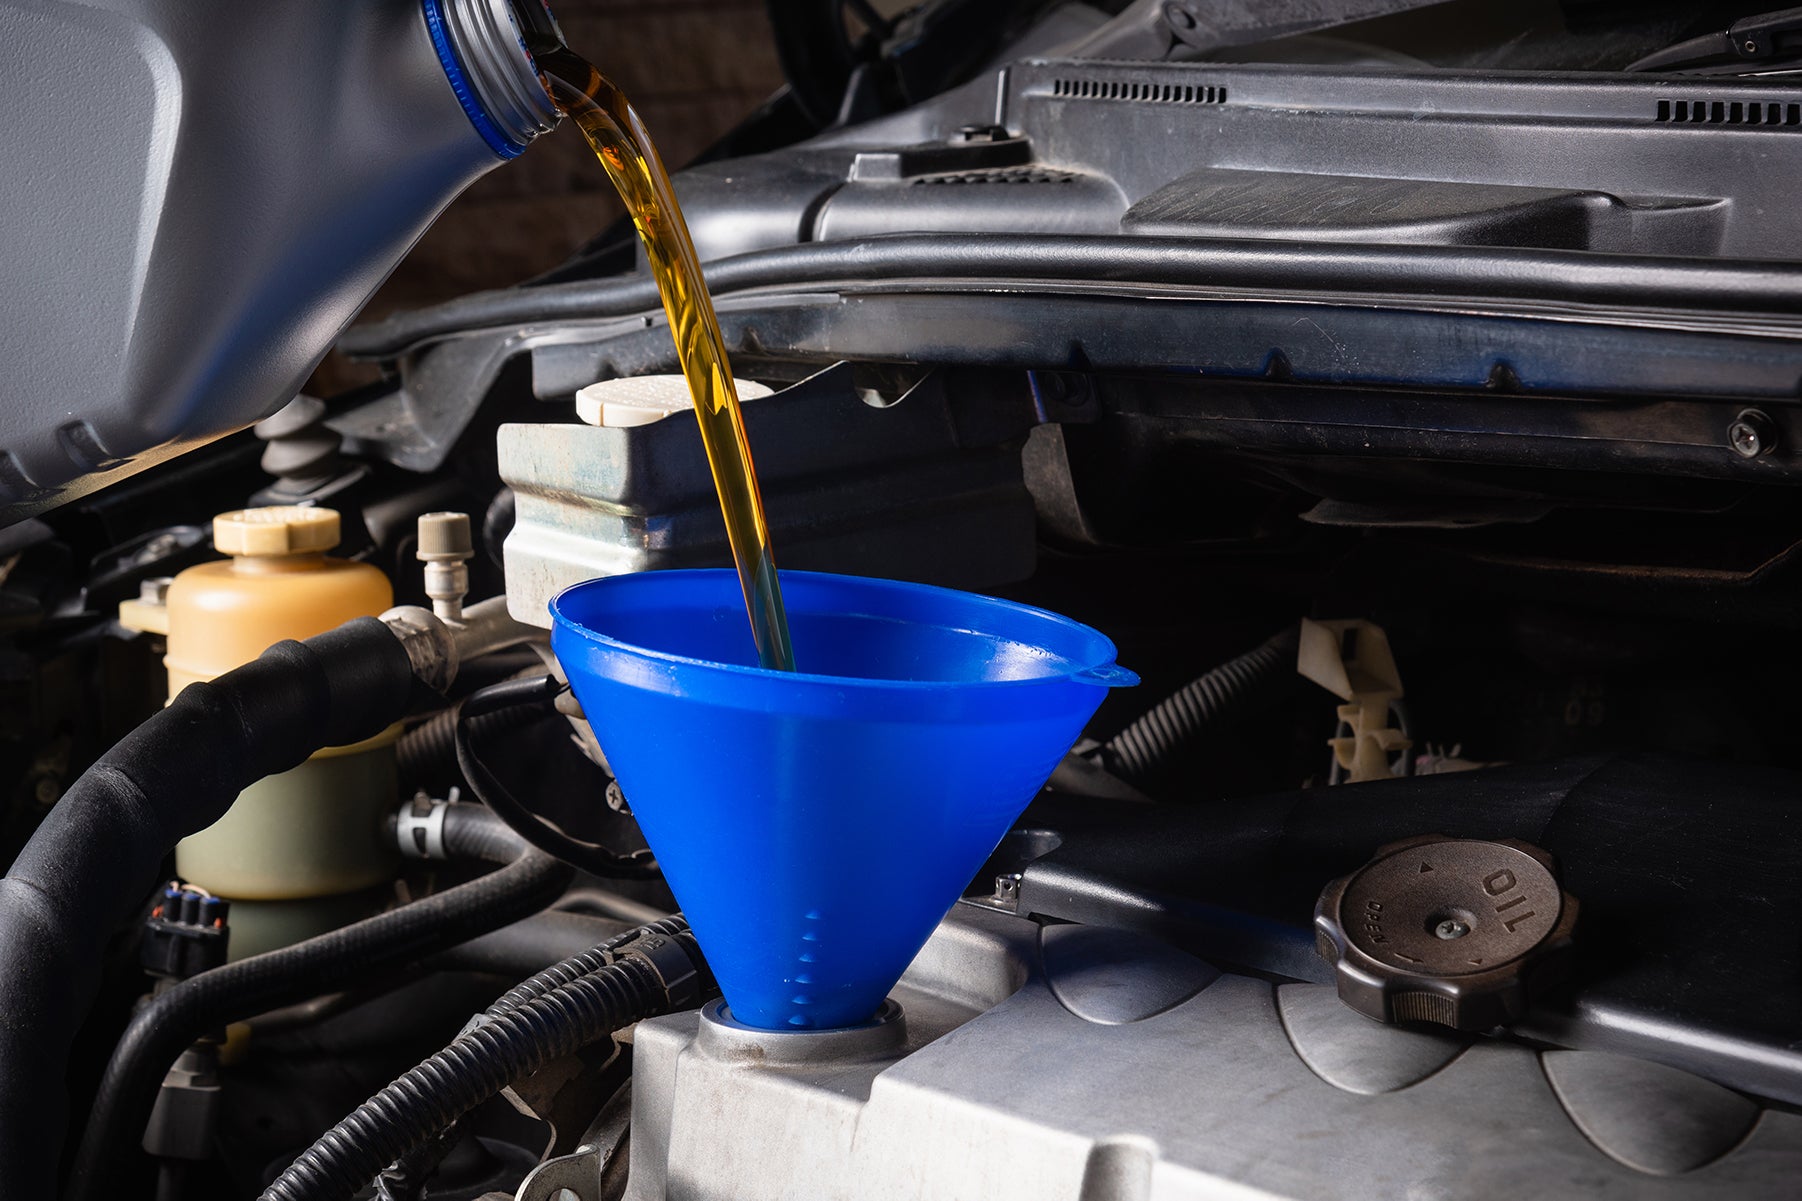 Bennett Toyota of Allentown is a Car Dealership near King of Prussia , PA | Toyota mechanic changing oil in Toyota vehicle